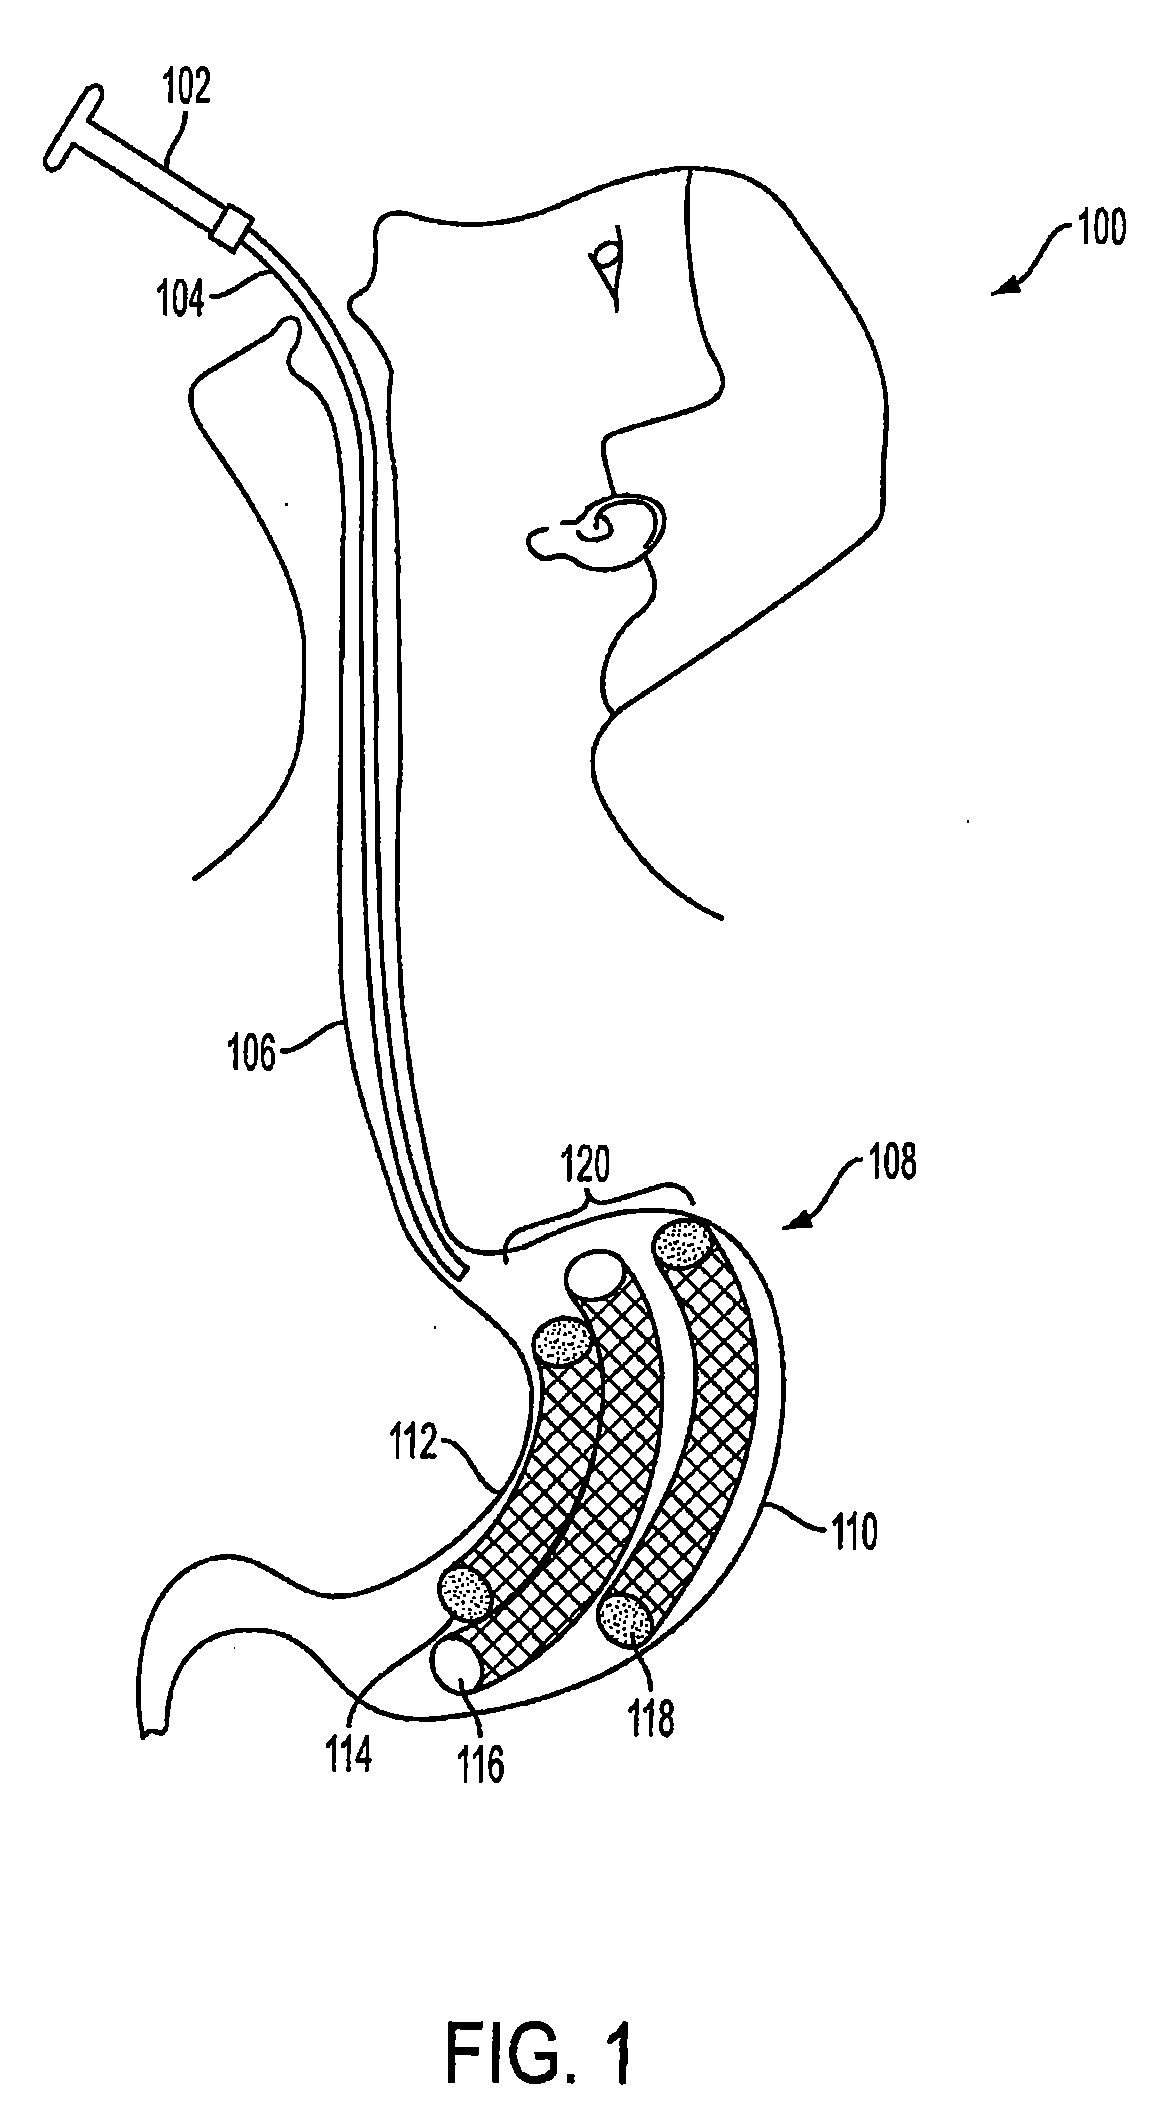 Method and apparatus for treating obesity and controlling weight gain using adjustable intragastric devices